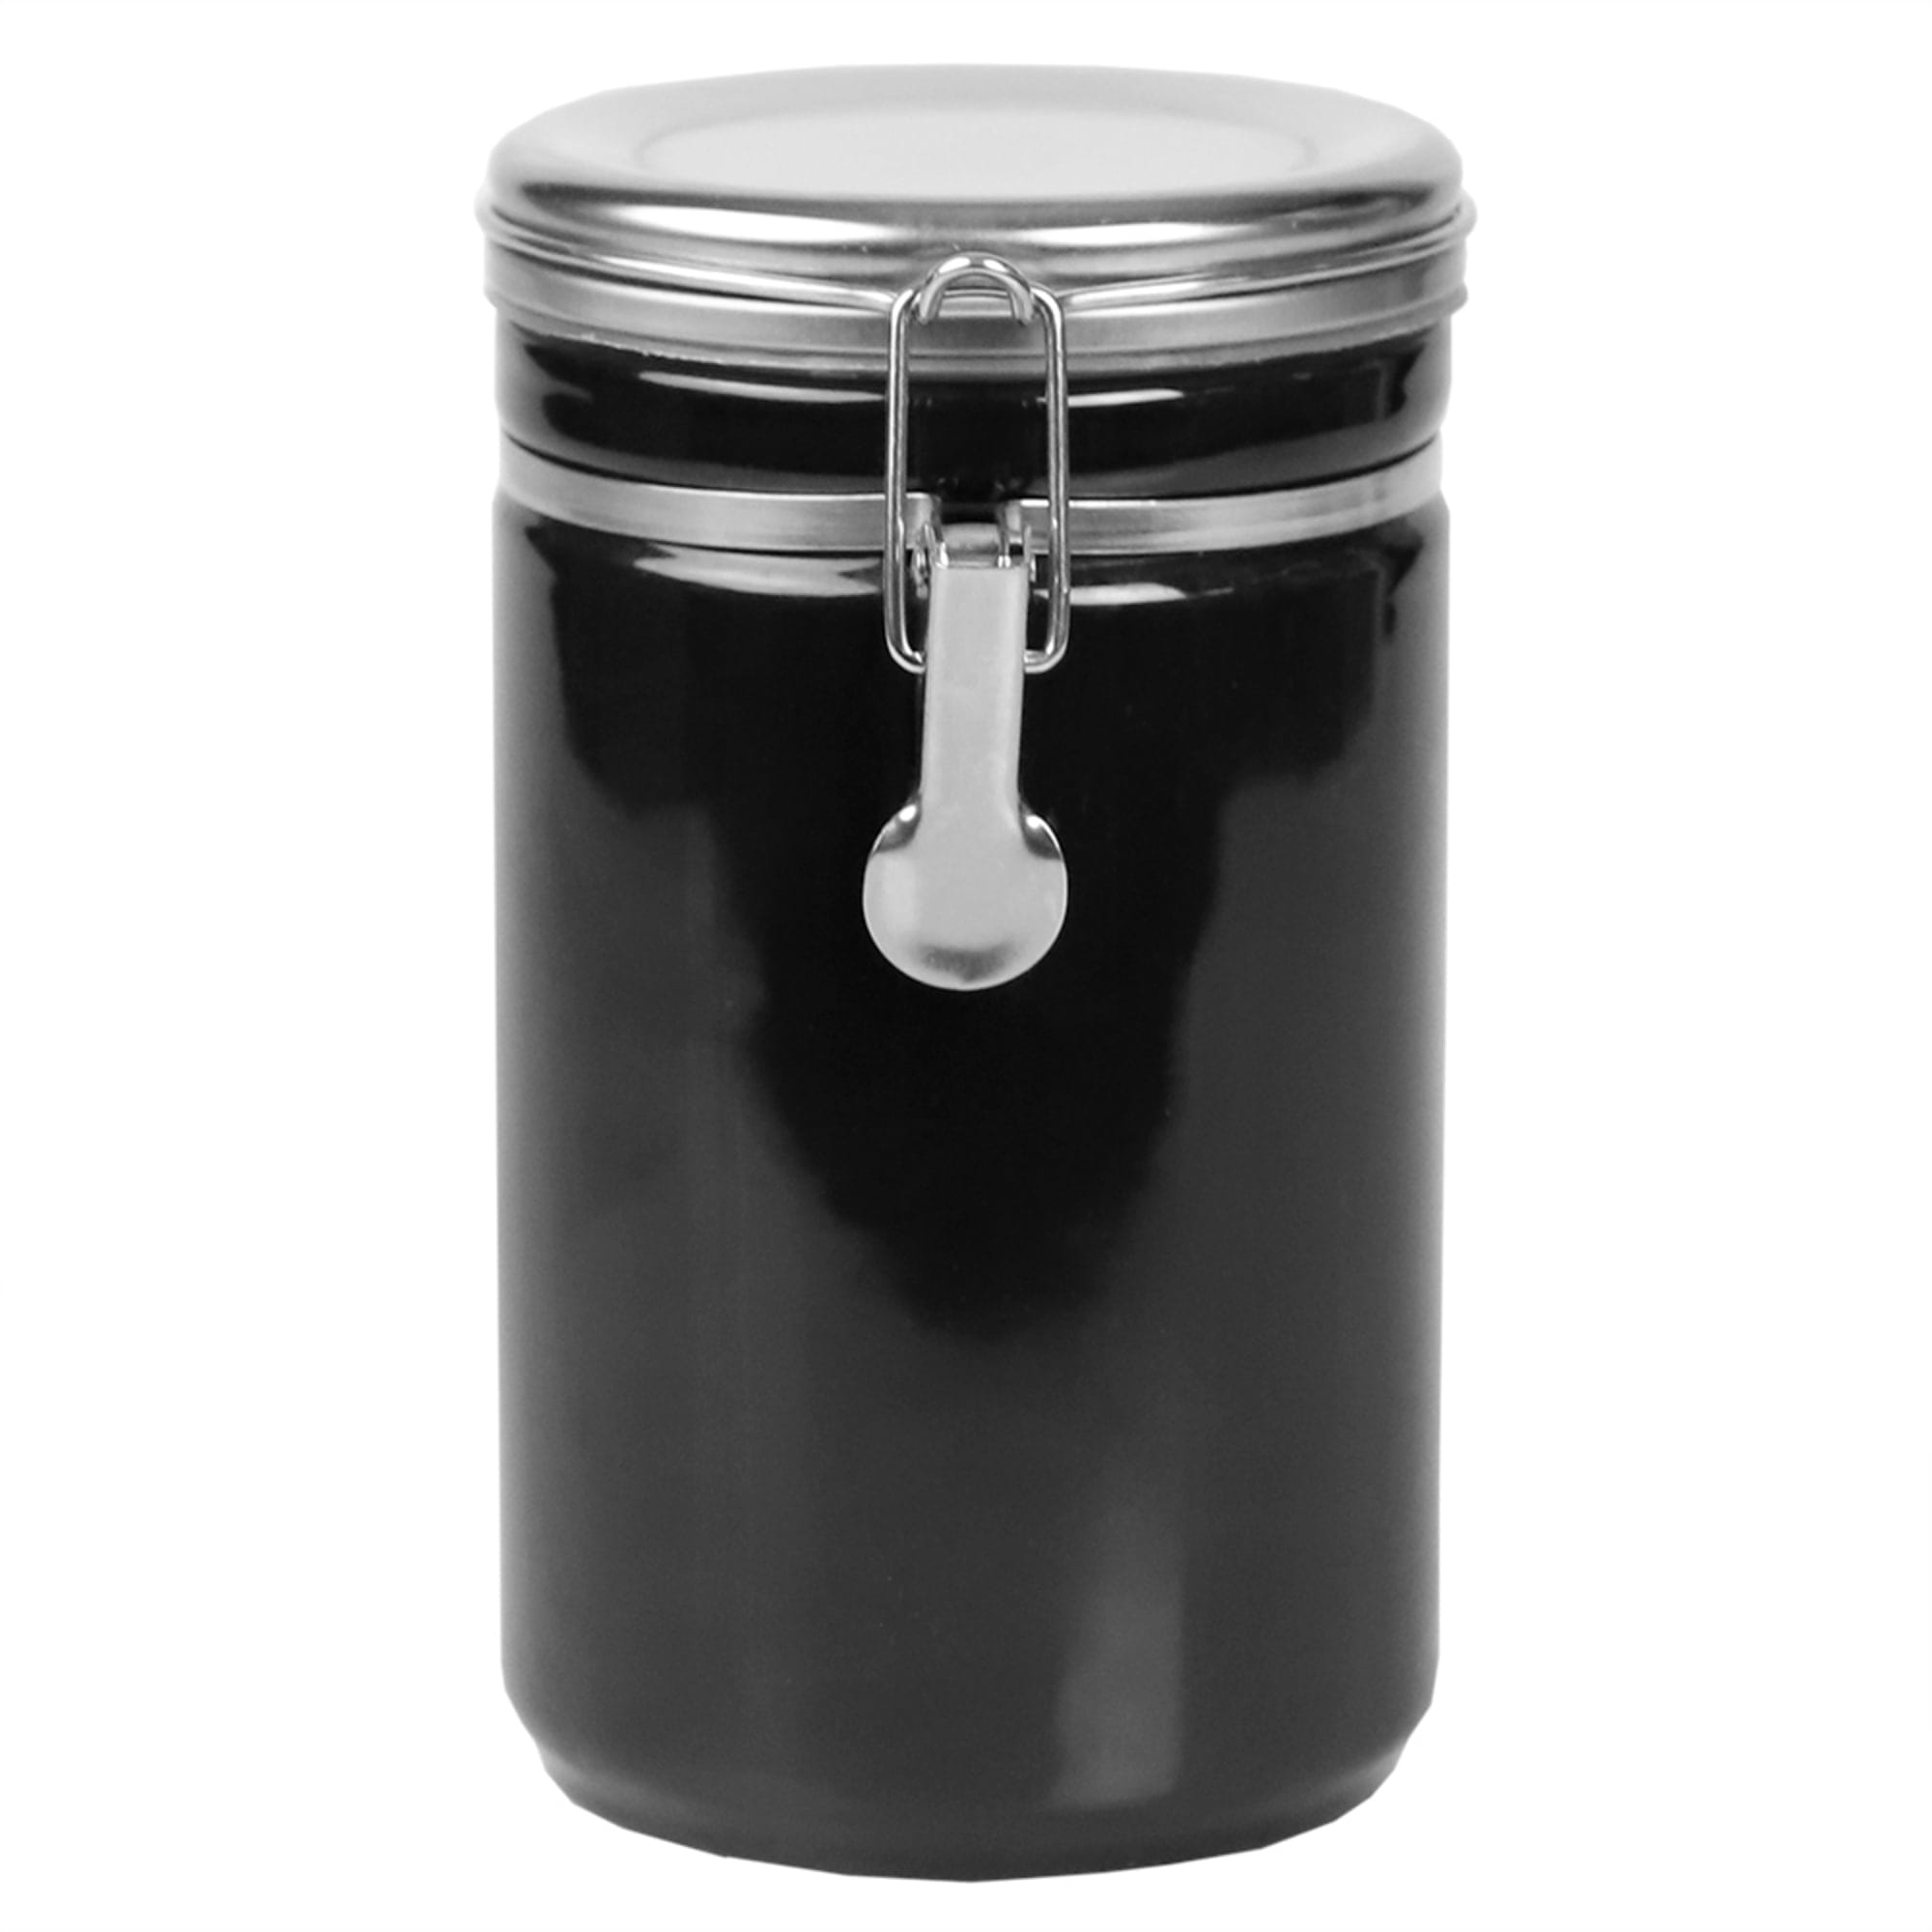 45 oz. Canister with Stainless Steel Top, Black | FOOD PREP | SHOP BASICS - Shop Home Basics